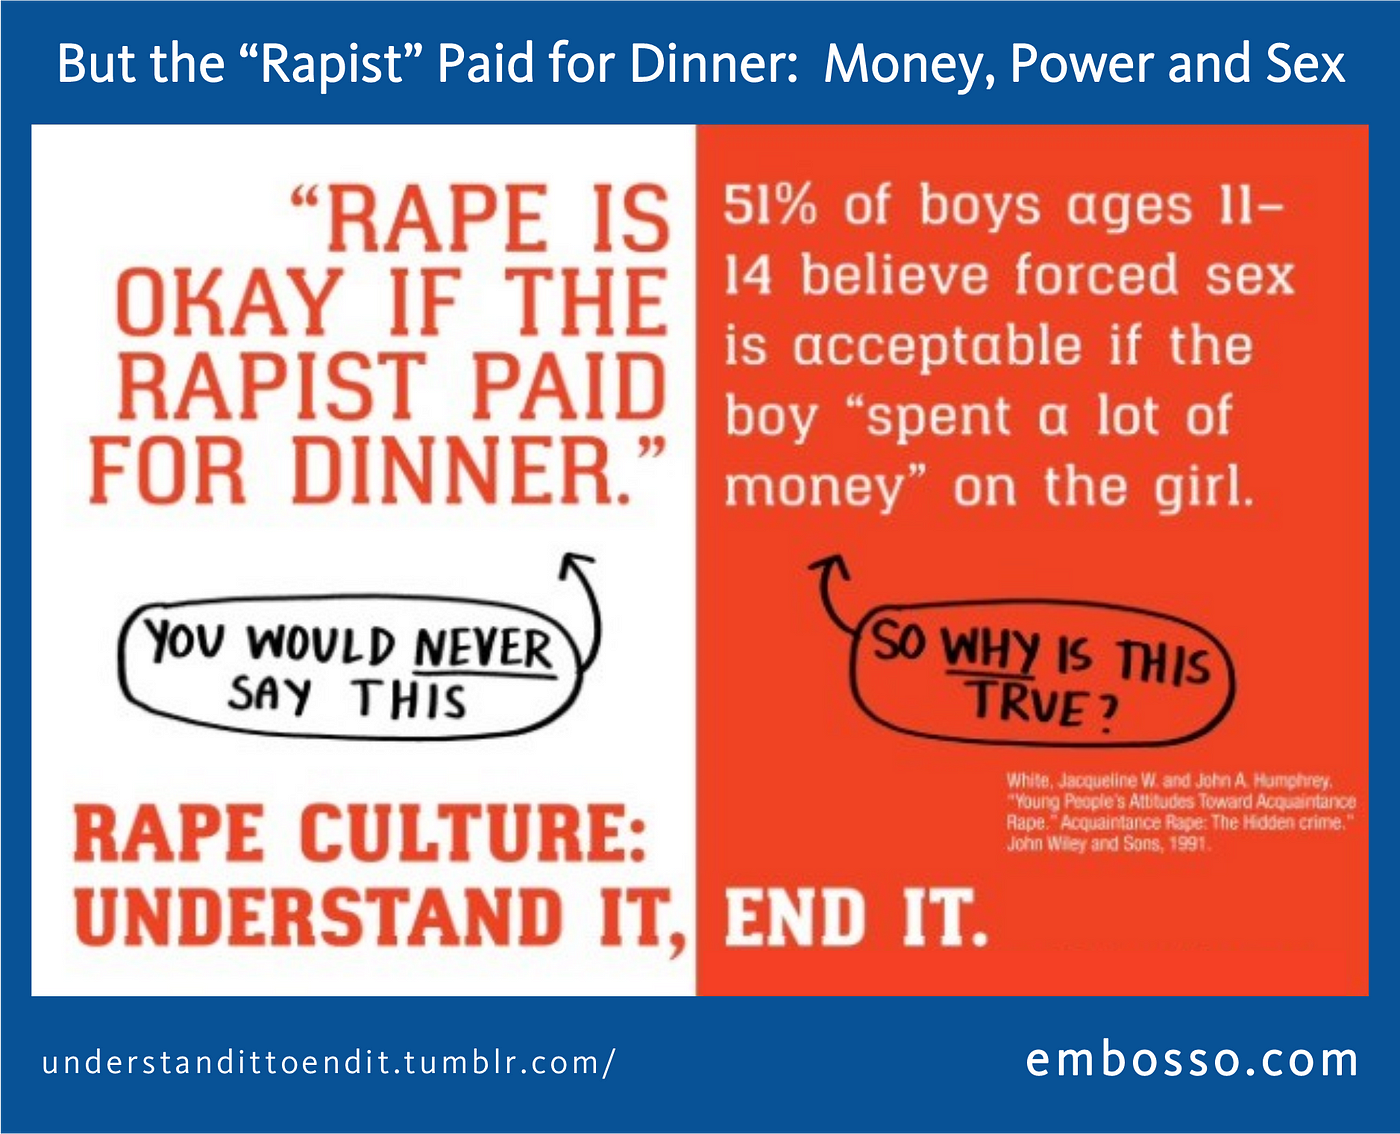 But the rapist paid for dinner Money, Power, and Sex by EM Bosso EM Bosso Medium